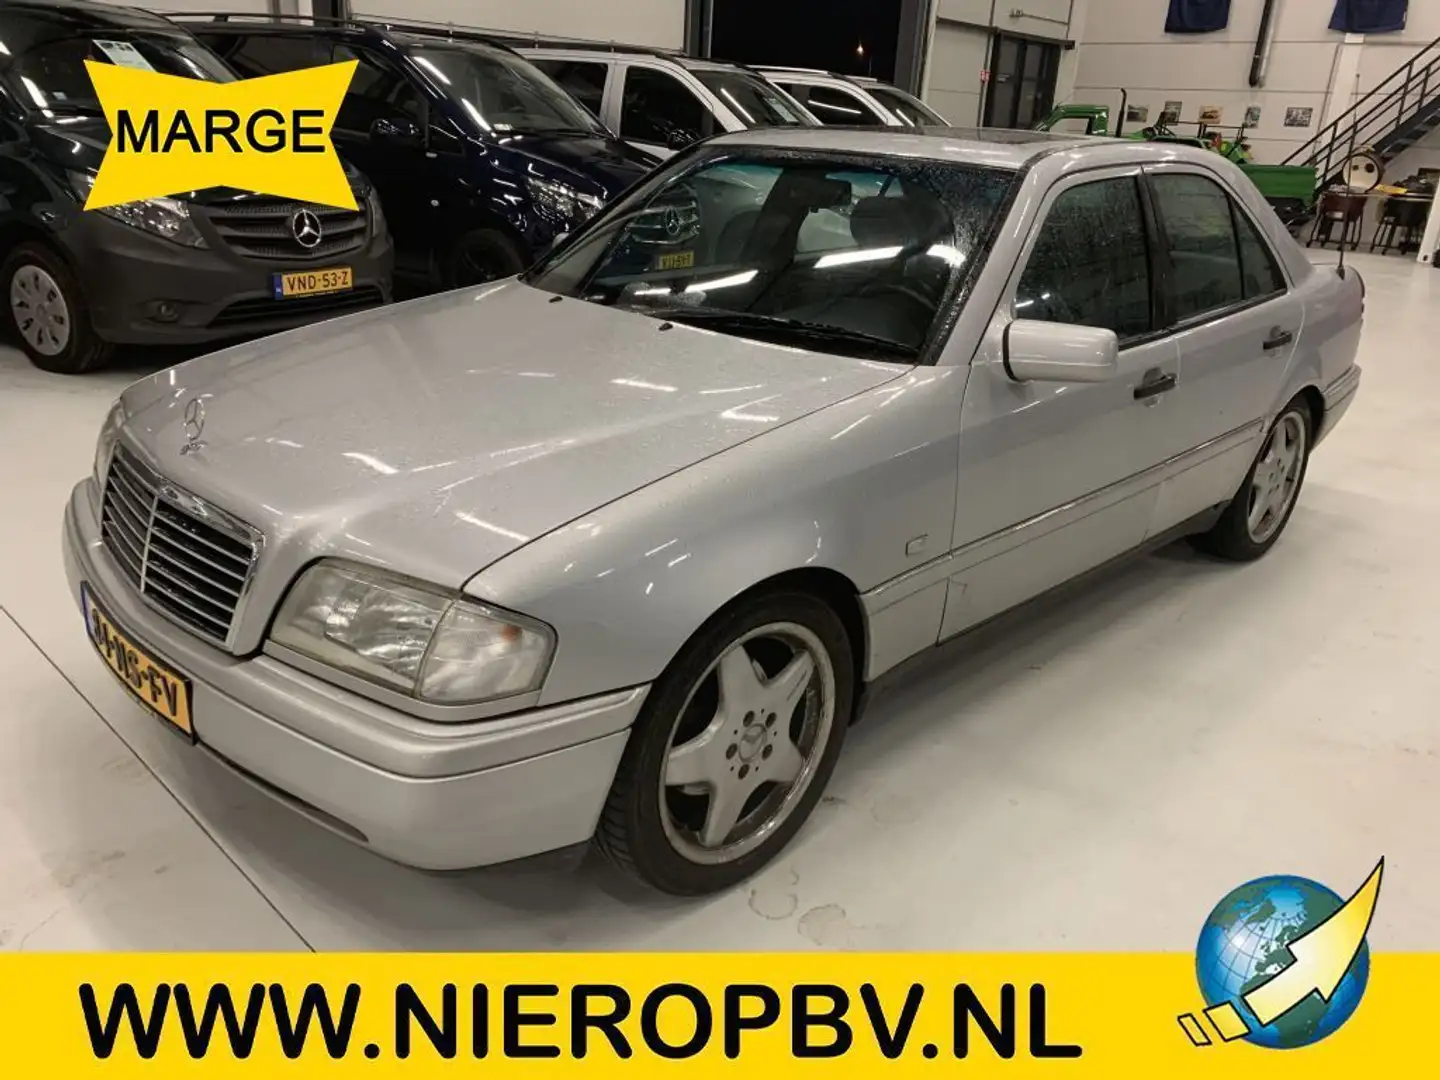 Mercedes-Benz C 280 Automaat Airco Dakraam 6 Cilinder ATP Tour MARGE Silver - 1